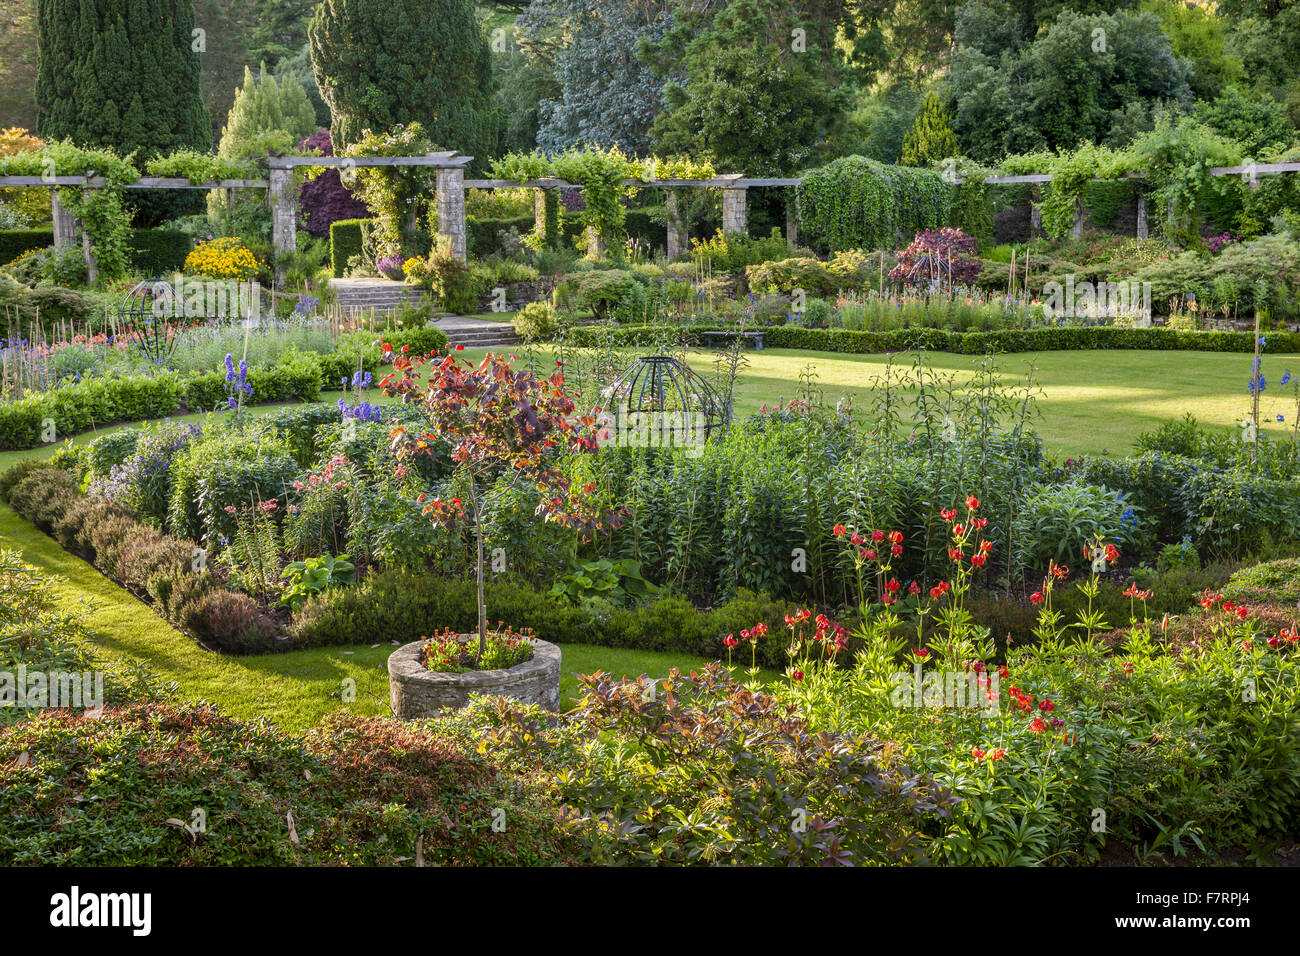 The Sunk Garden at Mount Stewart, County Down. Mount Stewart has been voted one of the world's top ten gardens, and reflects the design and artistry of its creator, Edith, Lady Londonderry. Stock Photo